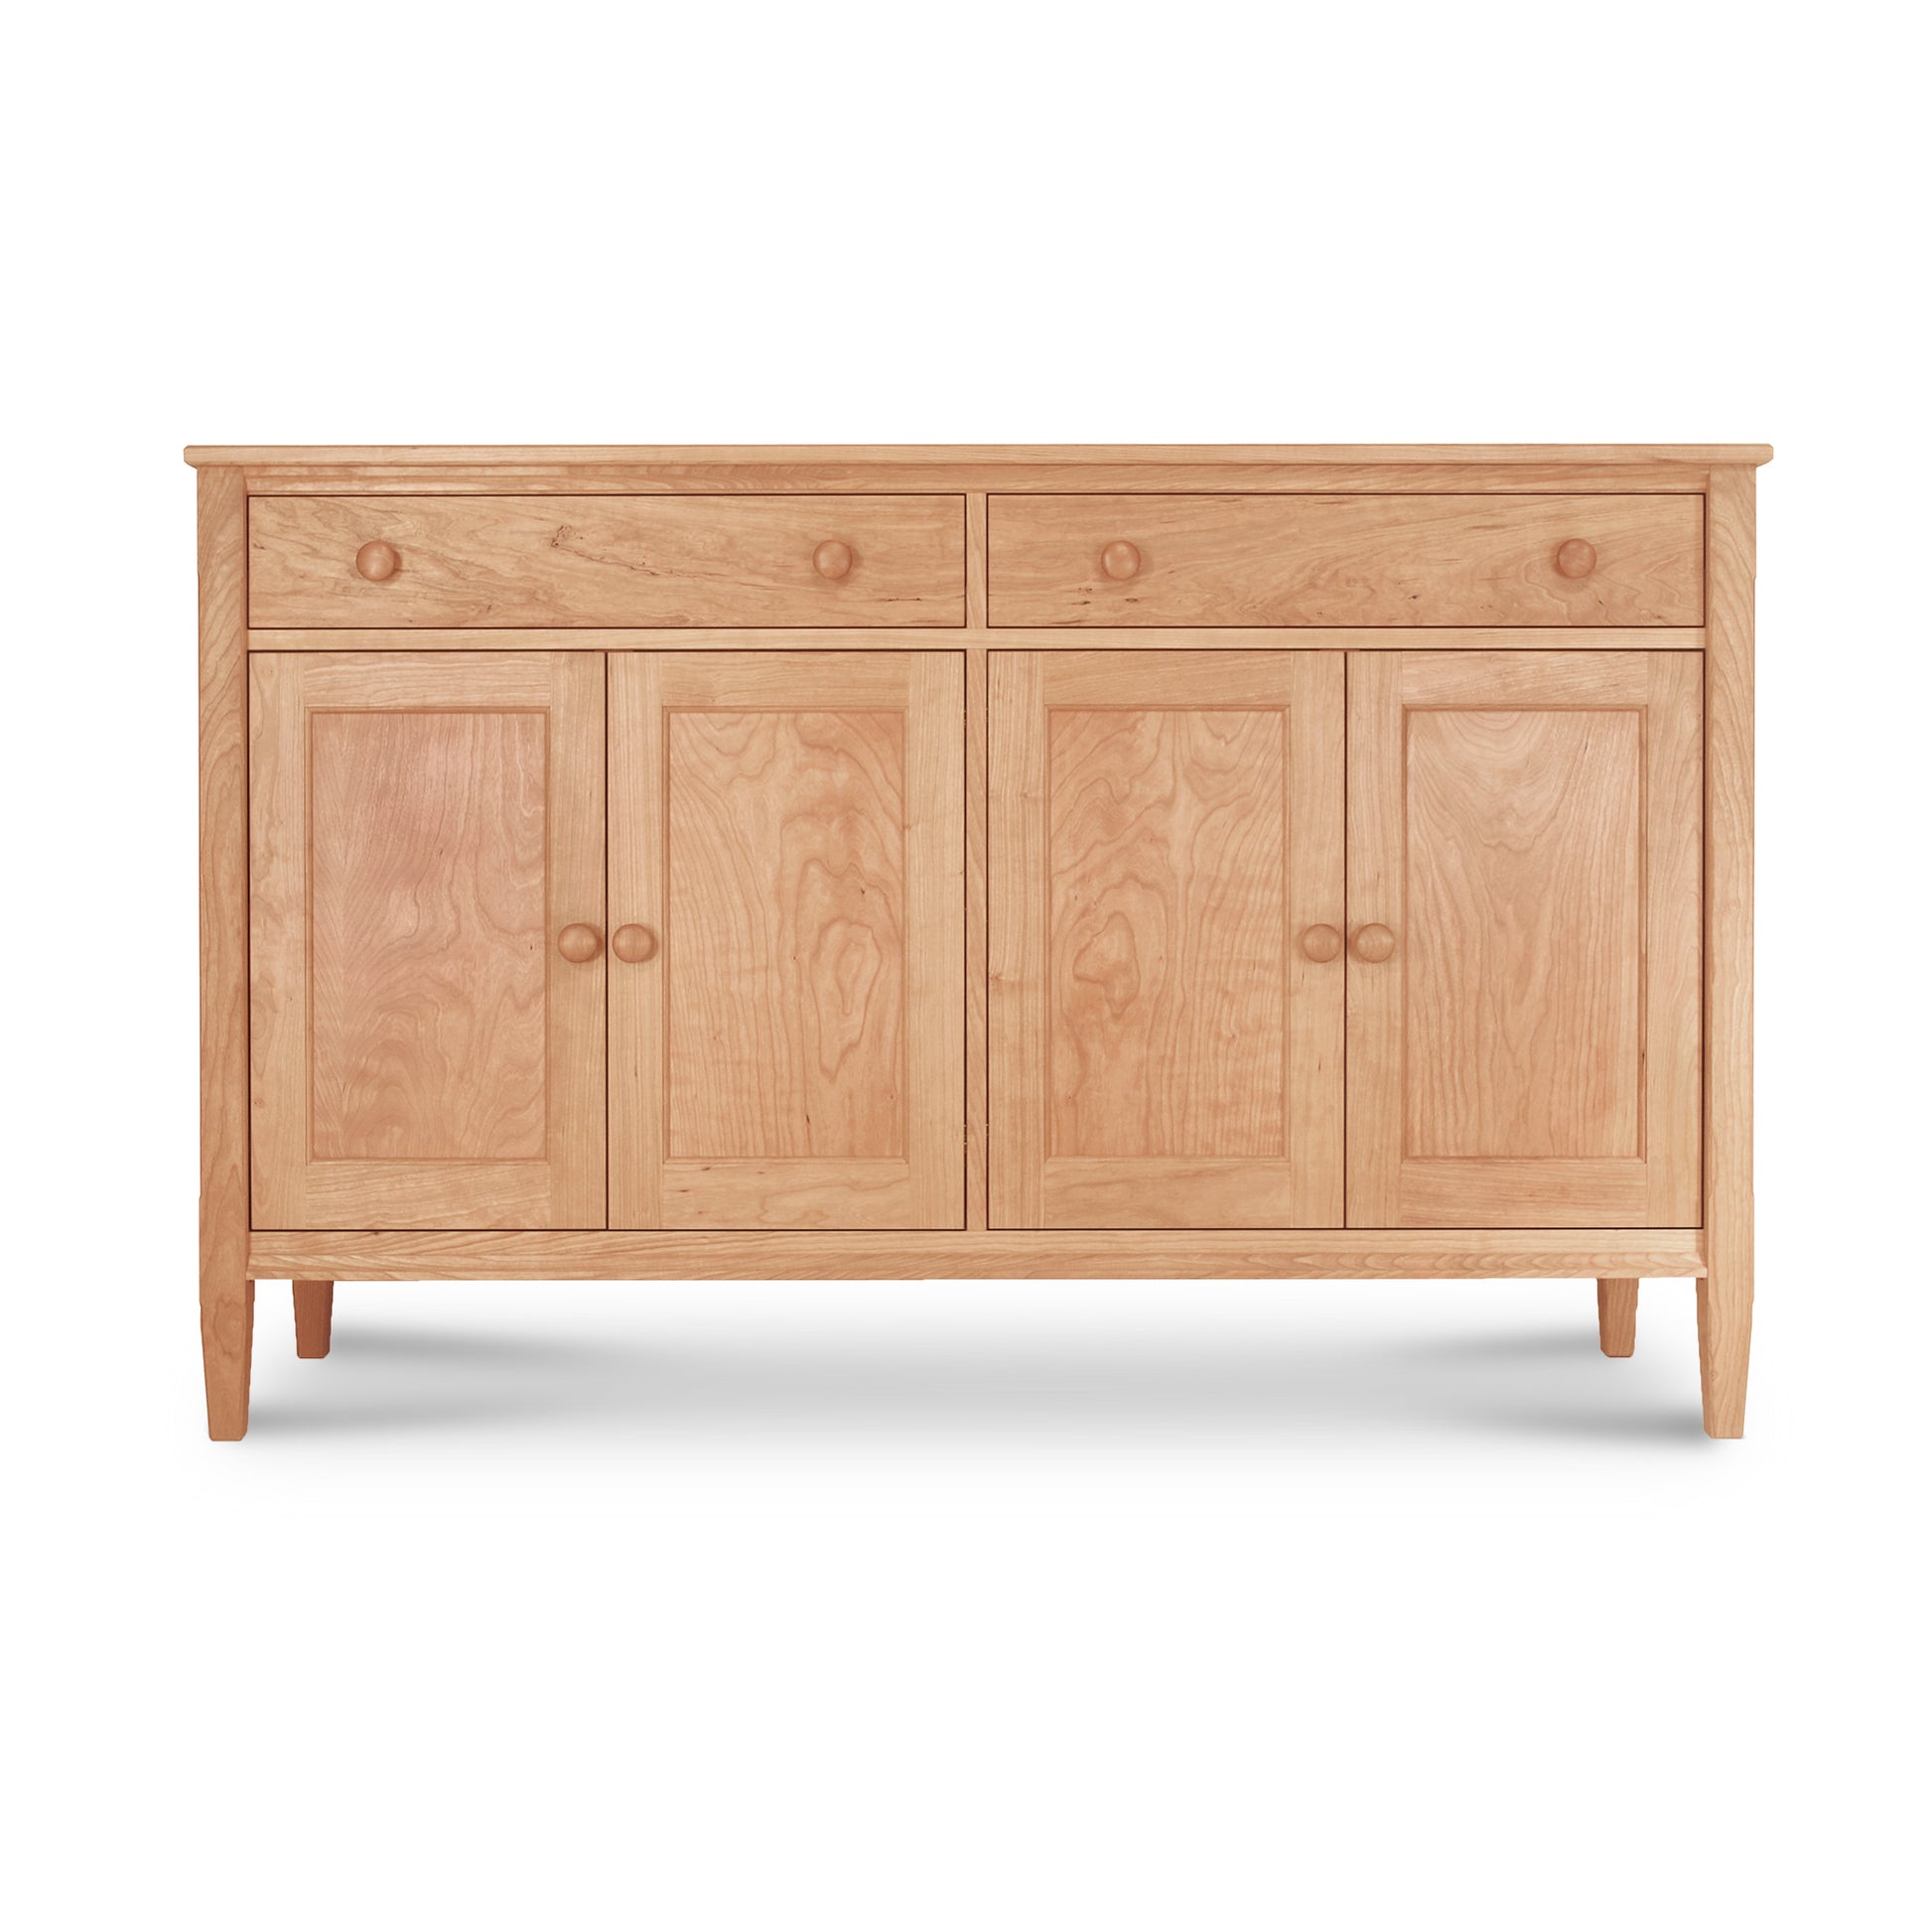 A Vermont Shaker Large 60" Sideboard by Maple Corner Woodworks, with two doors and two drawers, perfect for the kitchen or dining room.